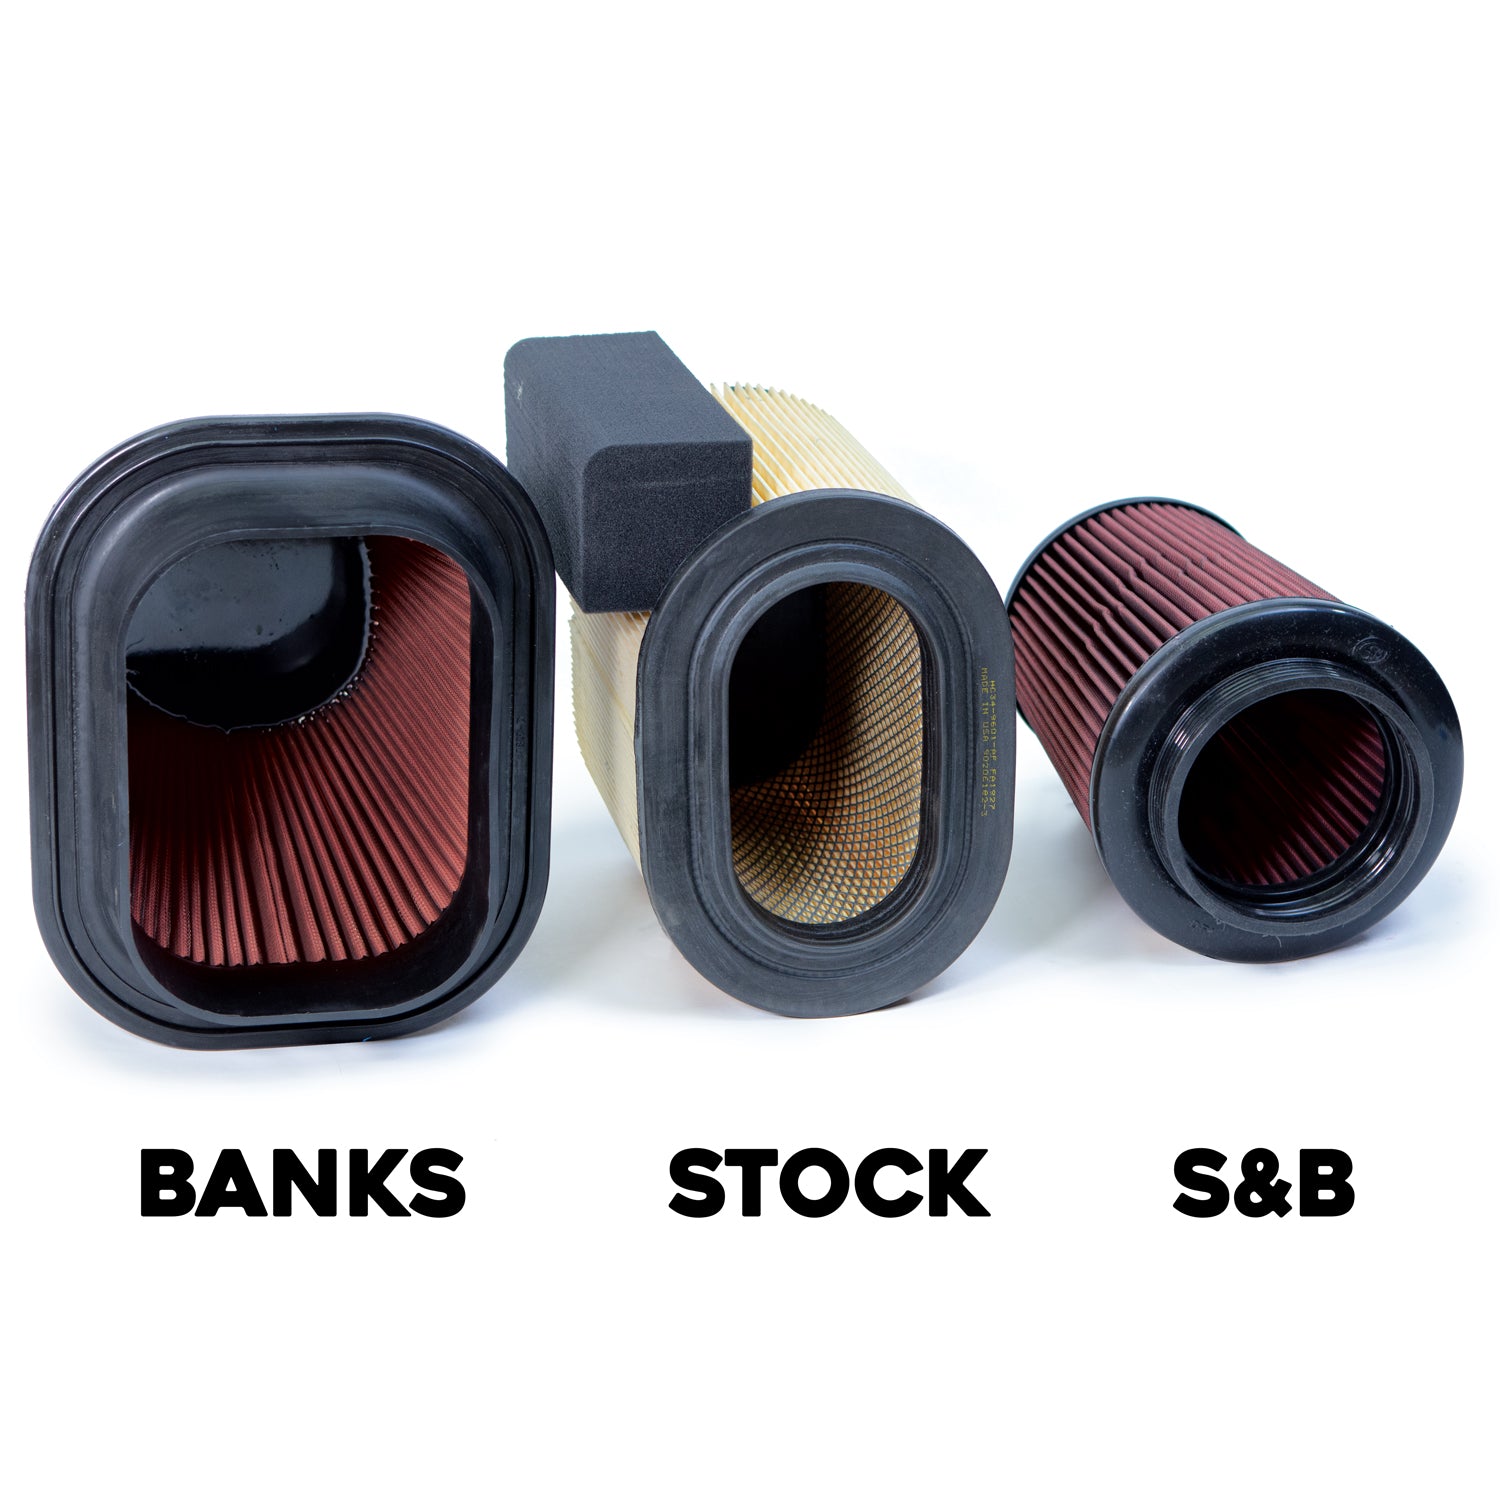 Banks Big-Ass filter compared to the competition and stock